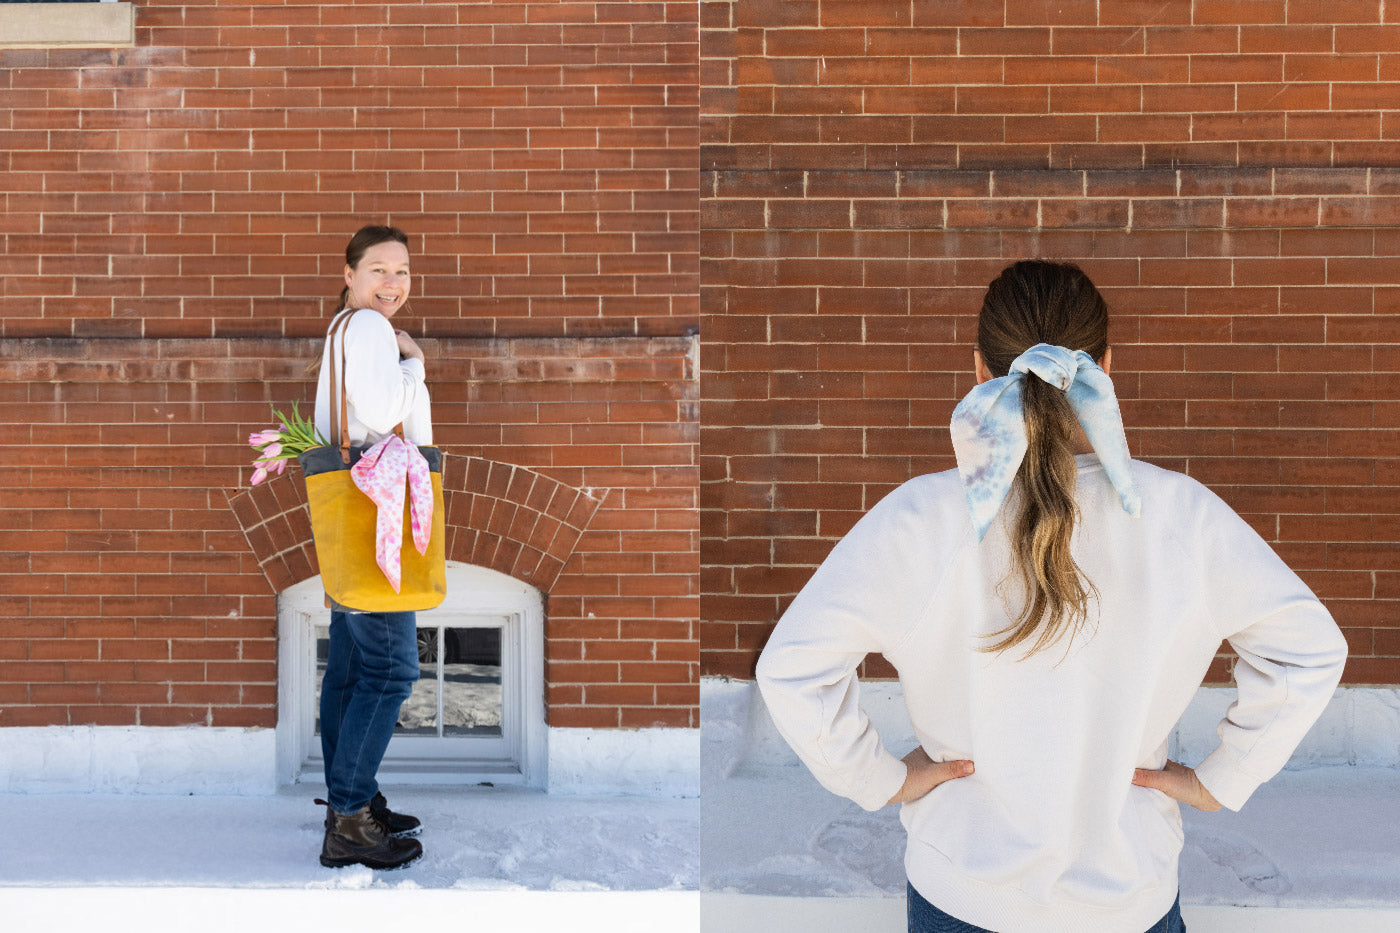 This is split image of Anna wearing her dyed scarves. On the left Anna is carrying a yellow tote bag with her pink scarf tied around one of the straps. The right image is a close up of the blue scarf tied around Anna's ponytail. 